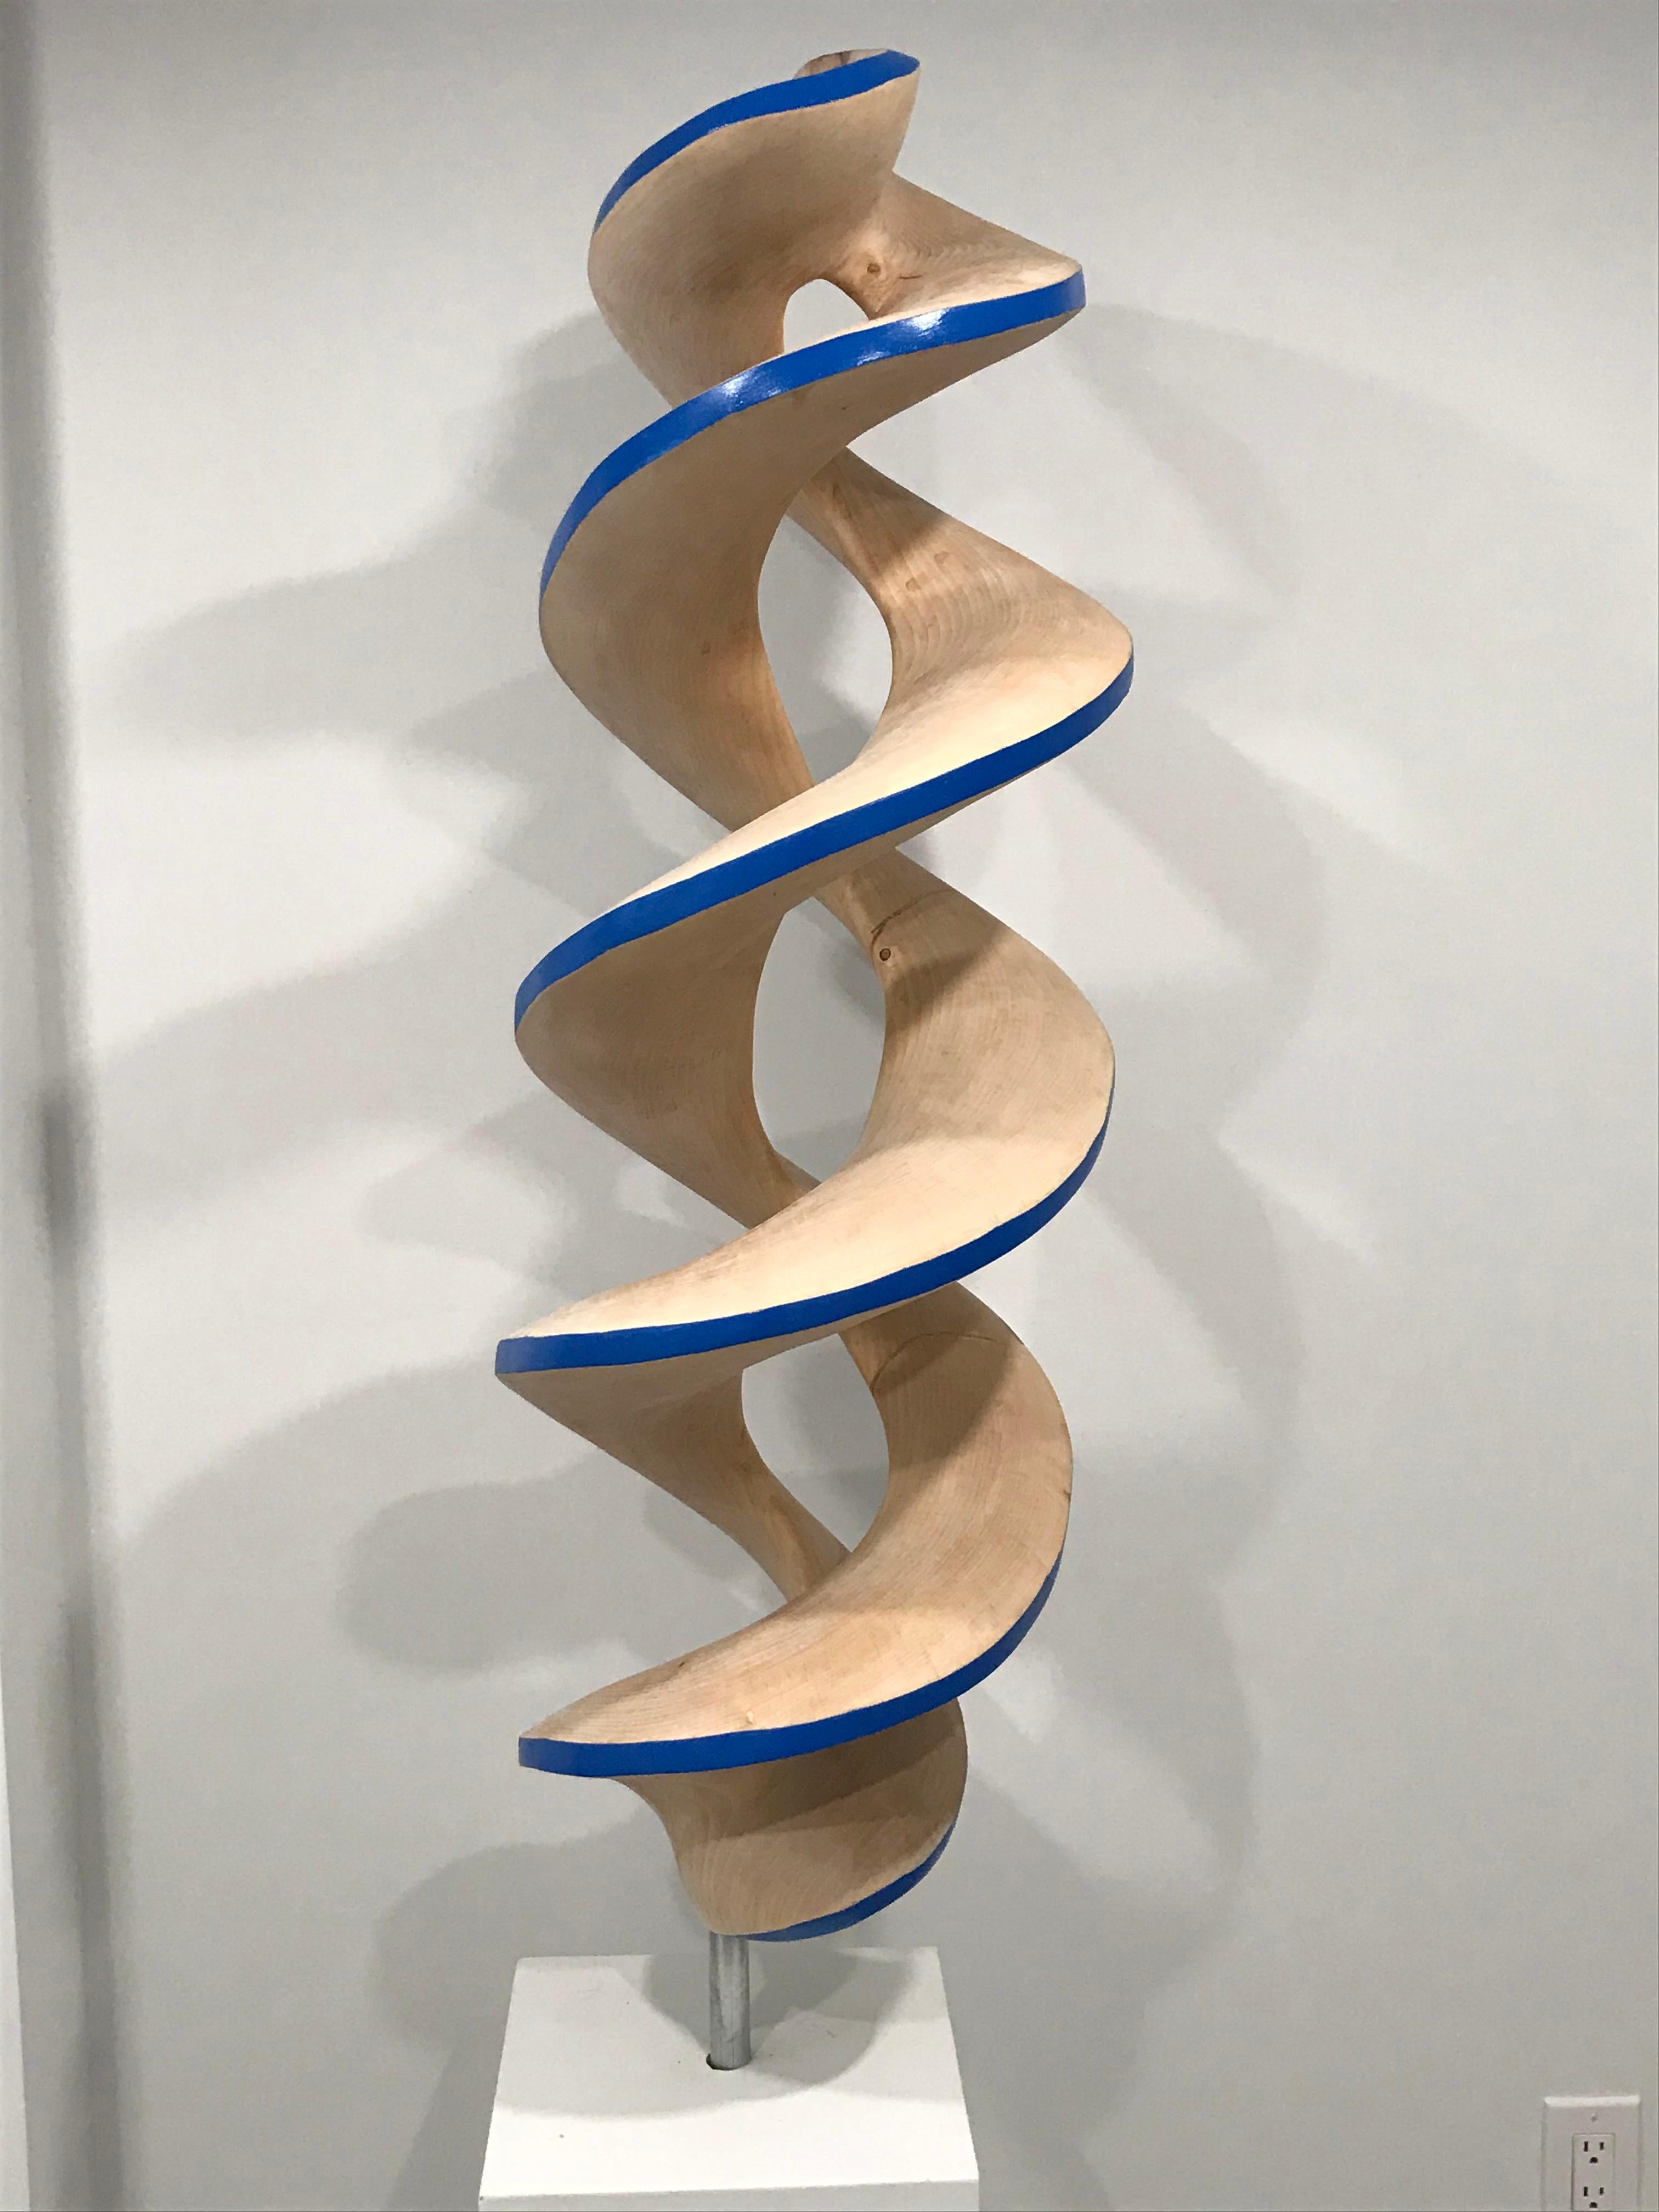 Spiral#1-Blue, large maple sculpture - Sculpture by Eric Pesso